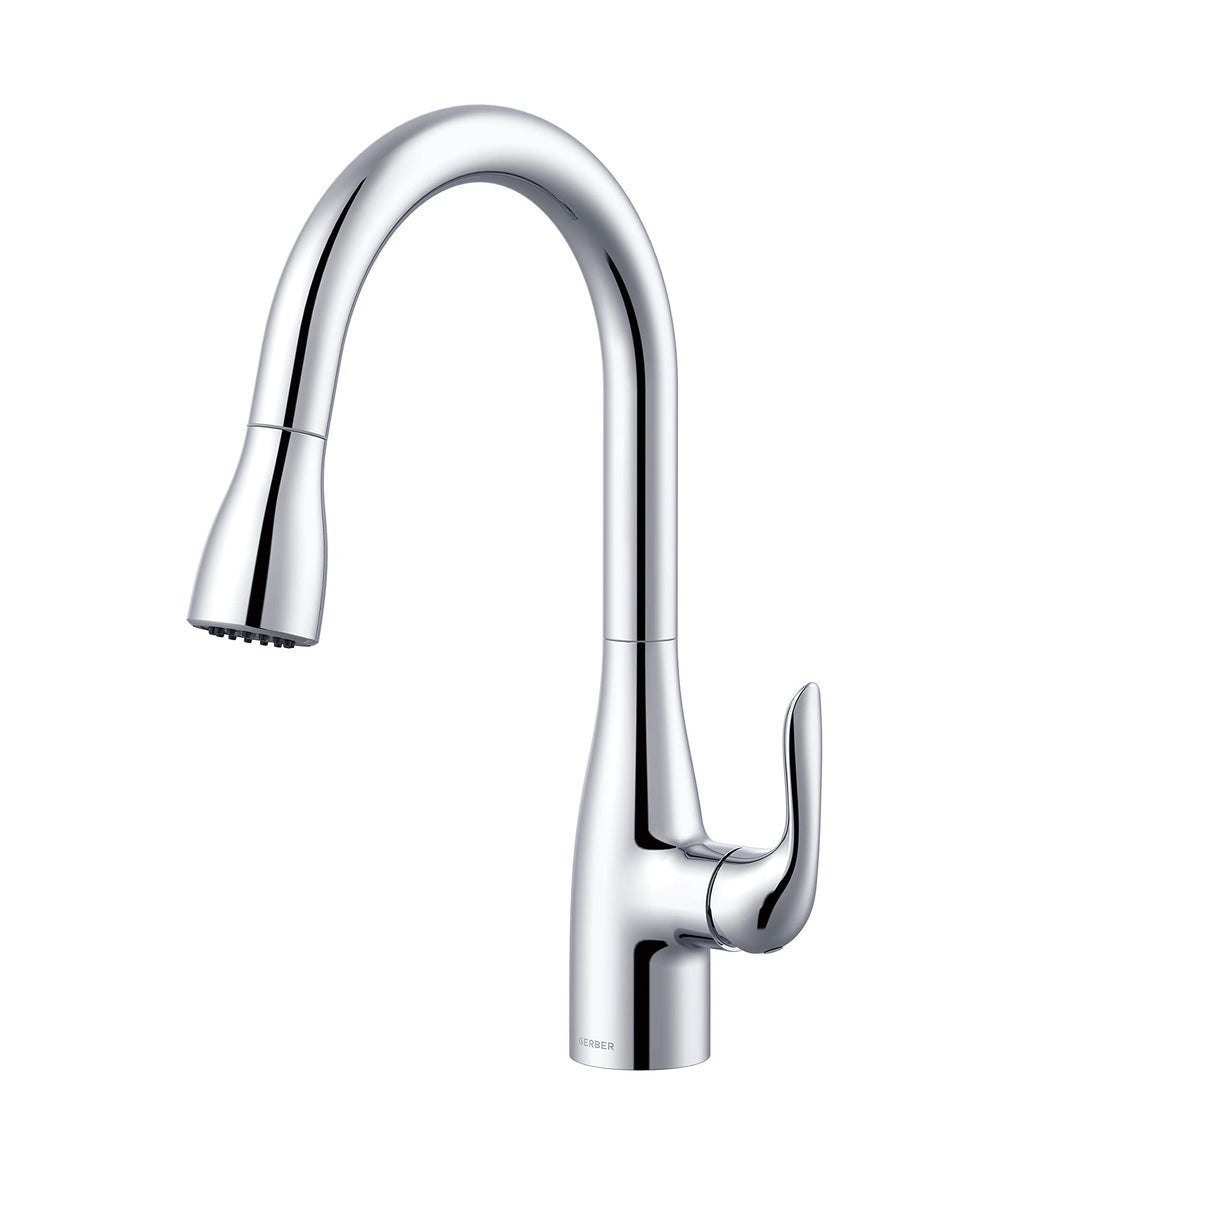 Gerber G0040164 Viper Single Handle Pull-down Kitchen Faucet - Chrome